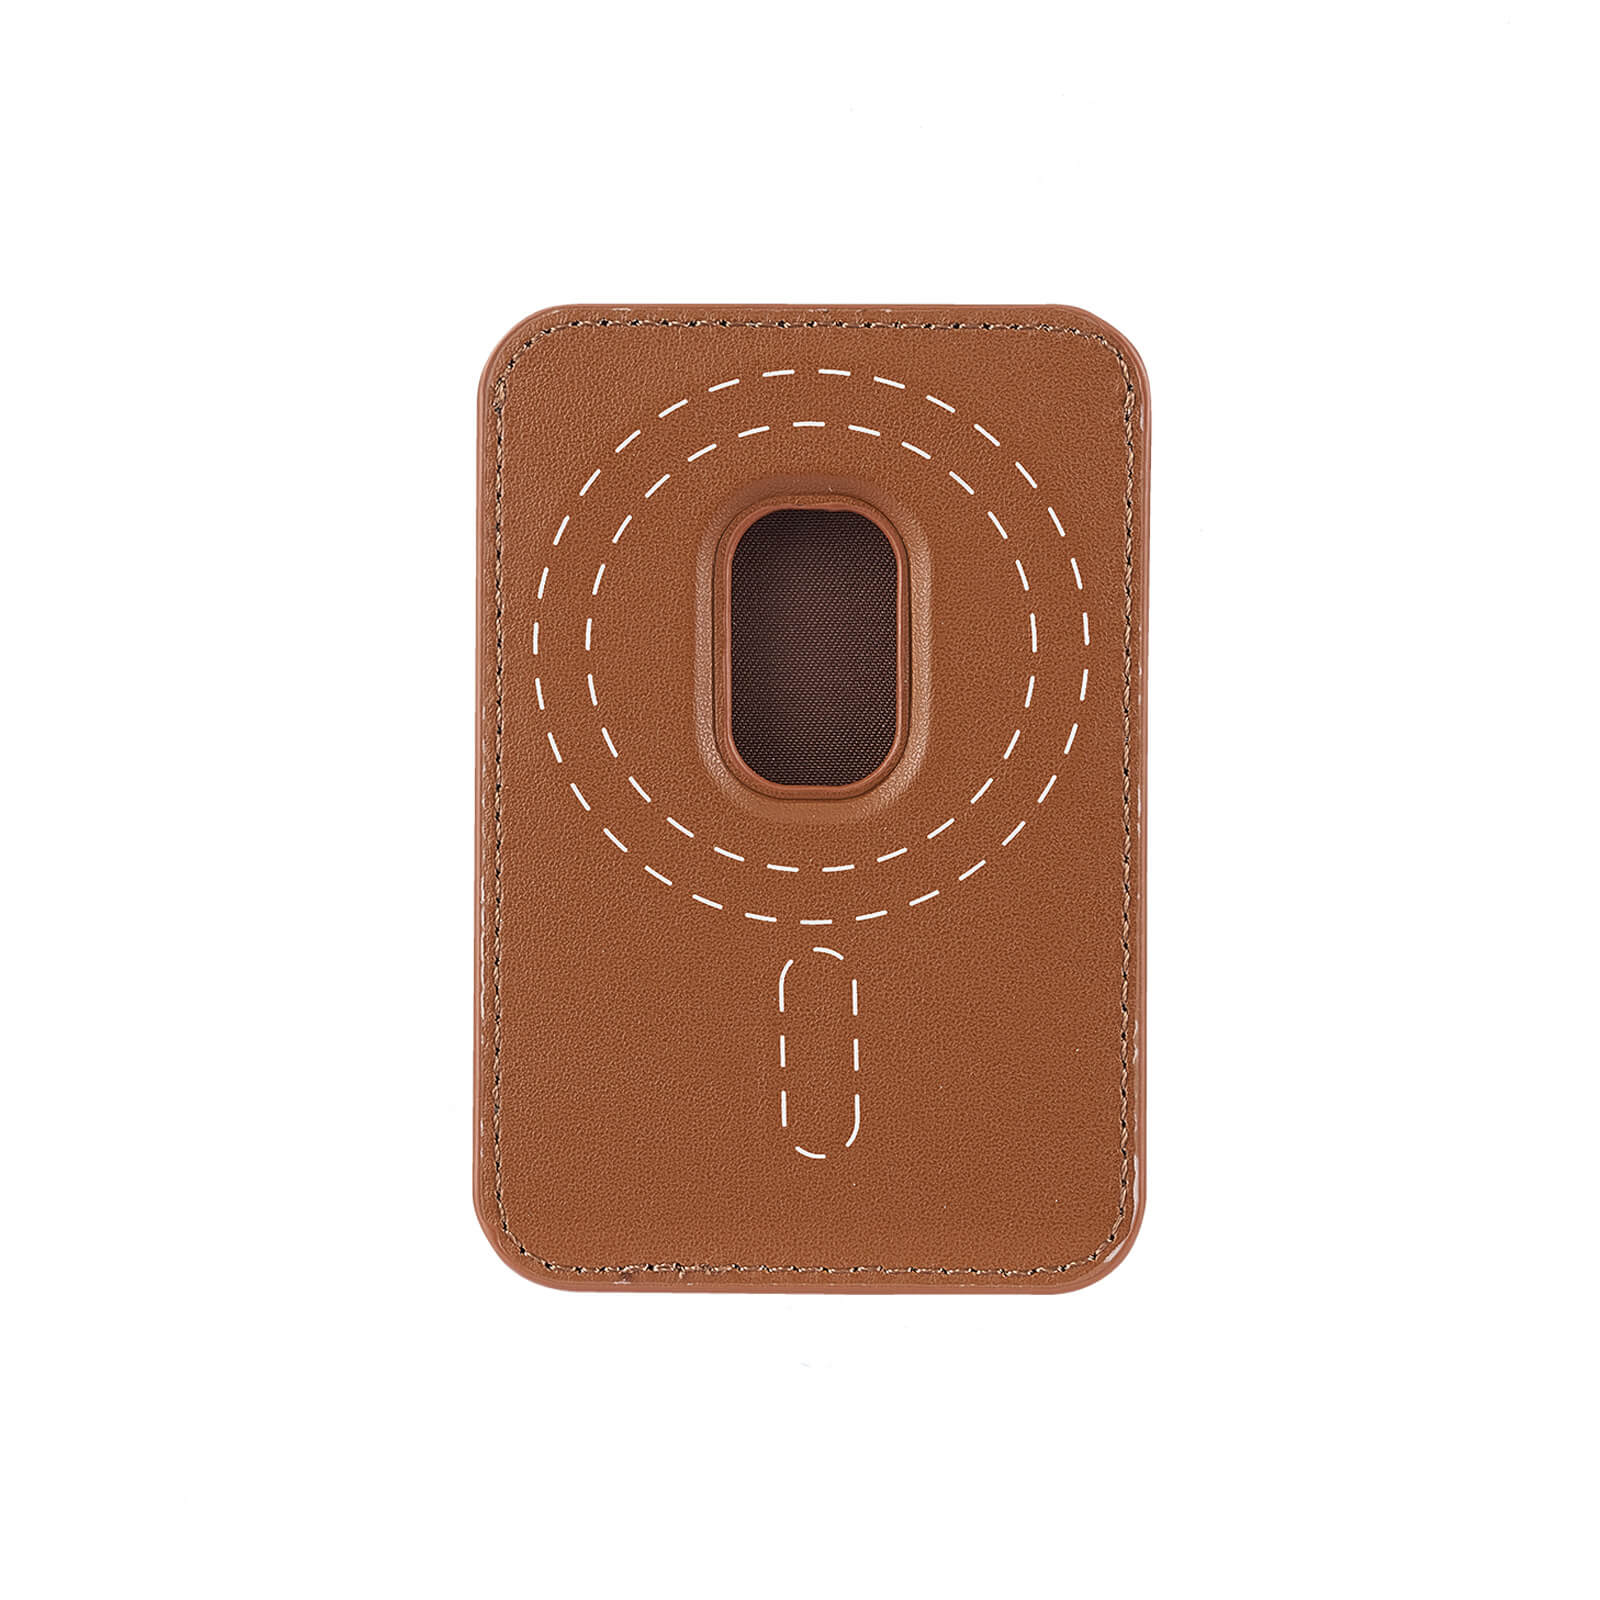 Slim and compact card holder with built in magnets to work with magsafe. color::cognac